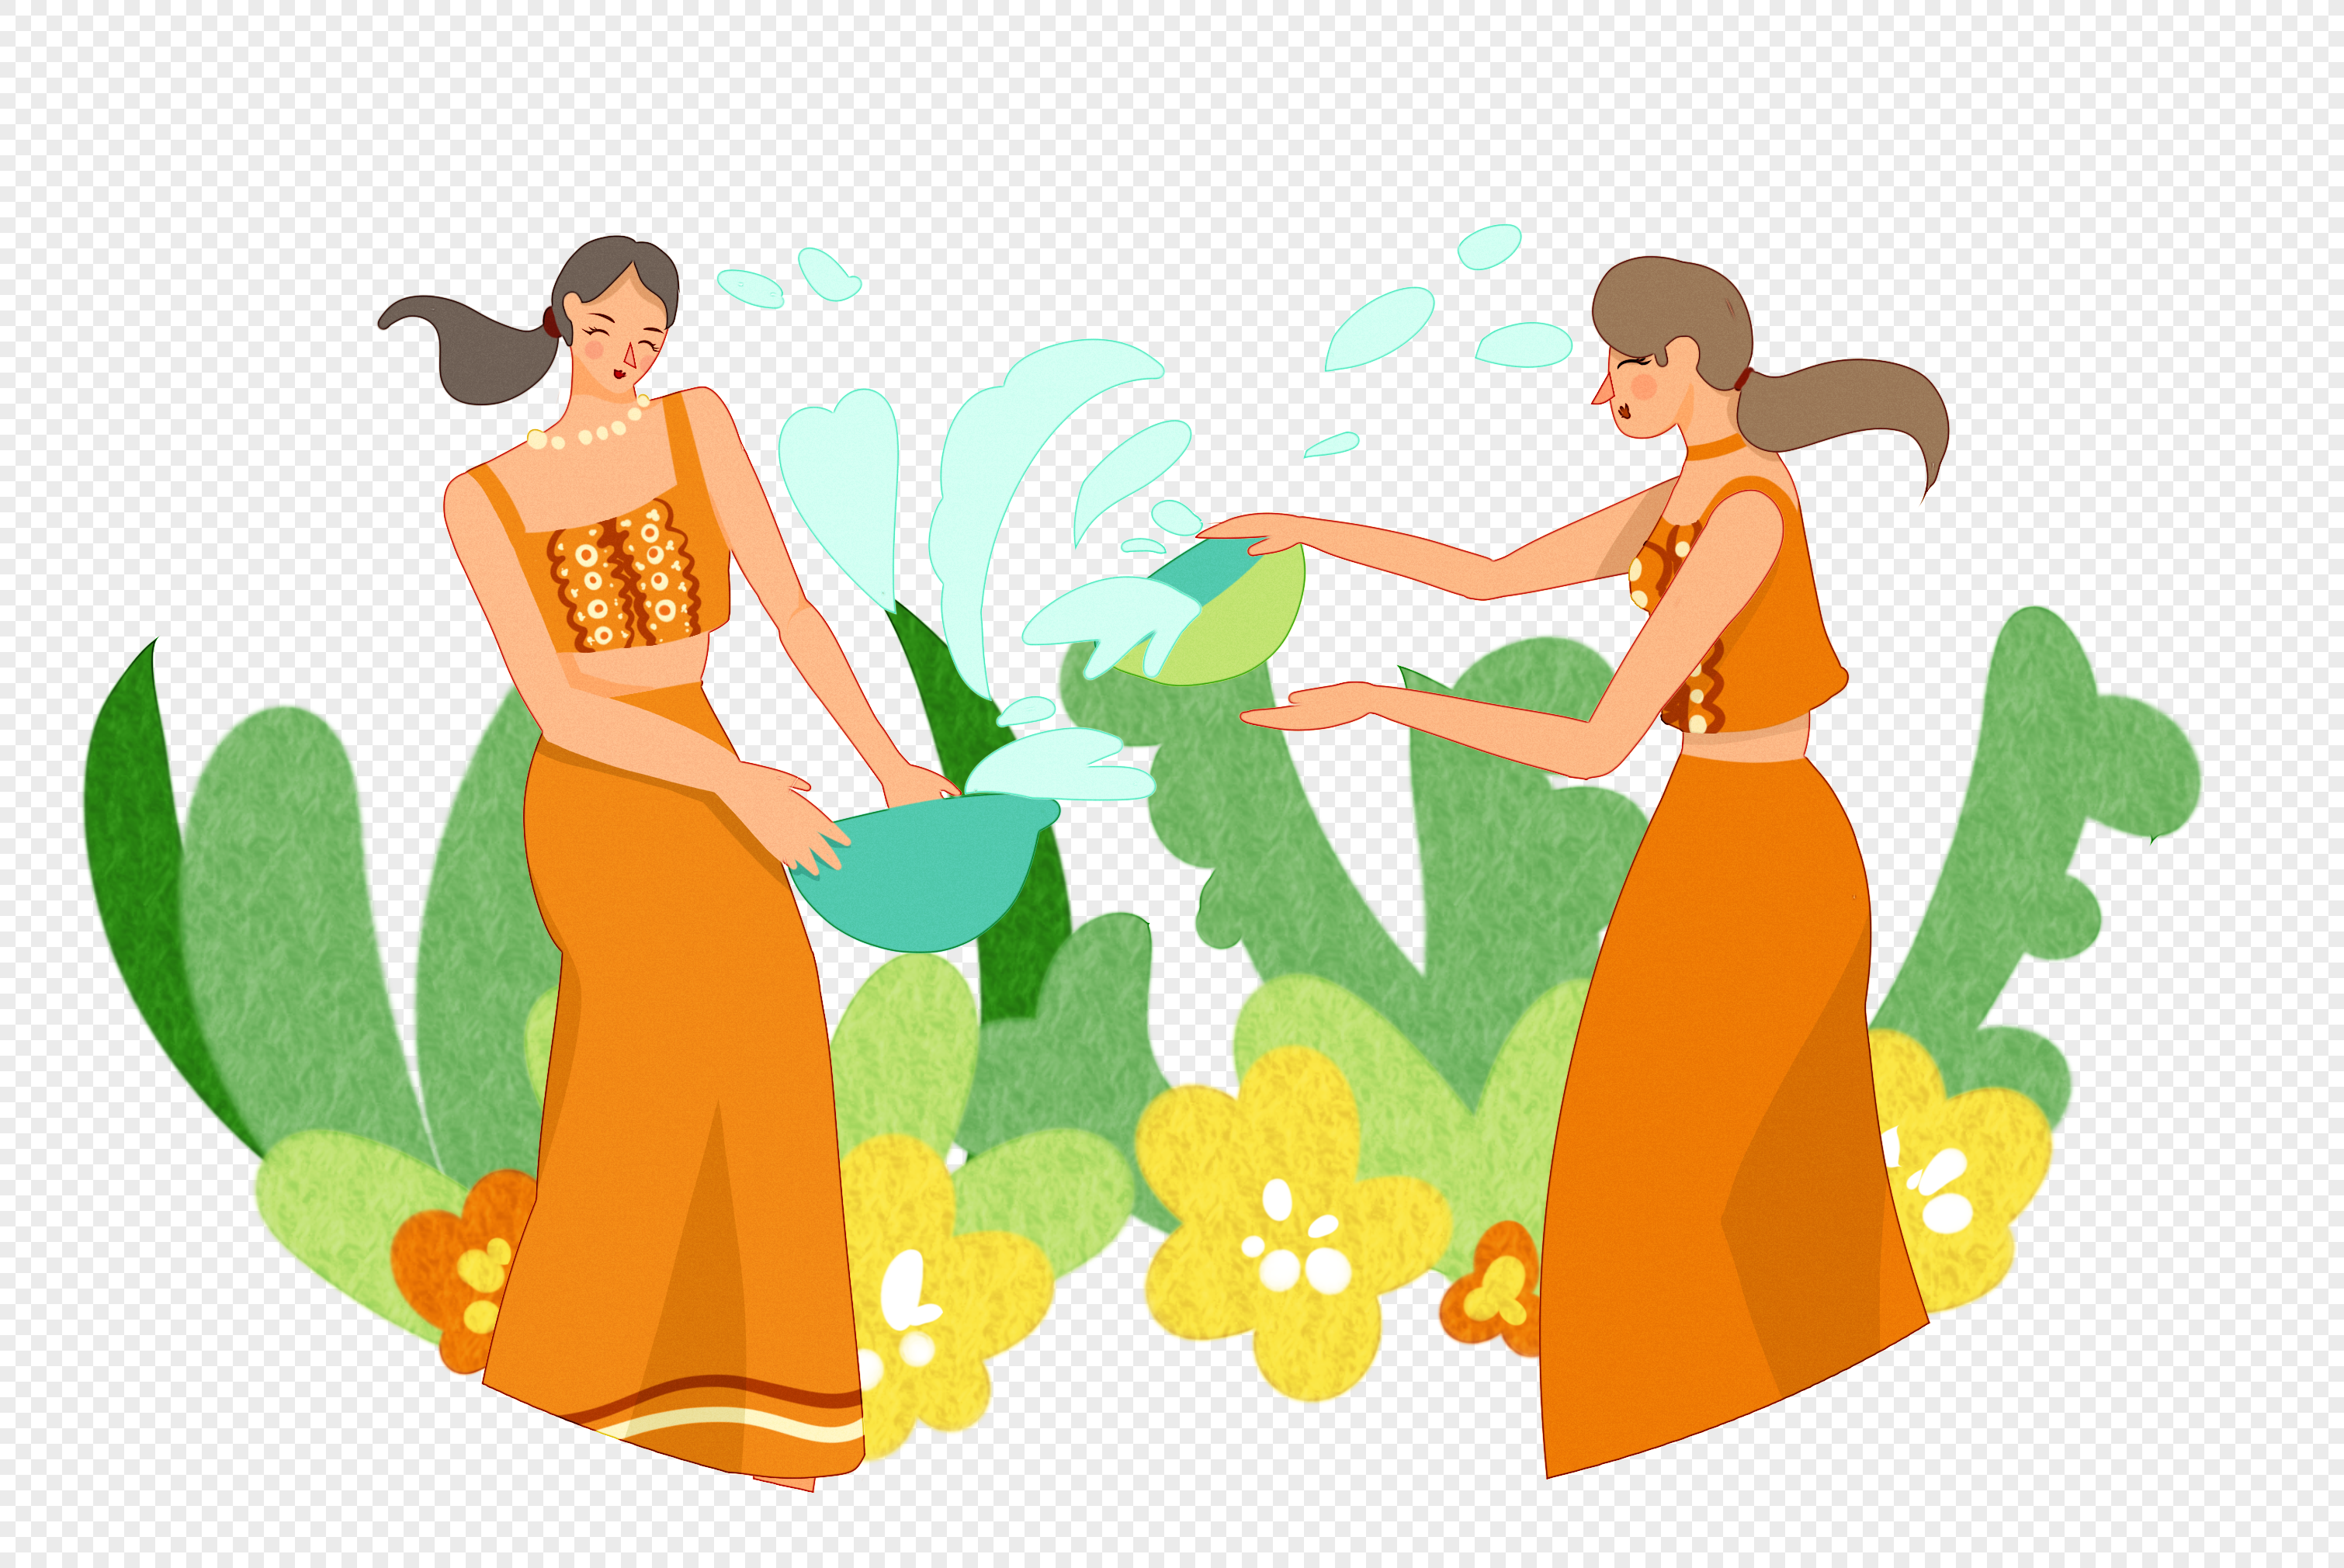 Songkran Festival PNG Image Free Download And Clipart Image For Free